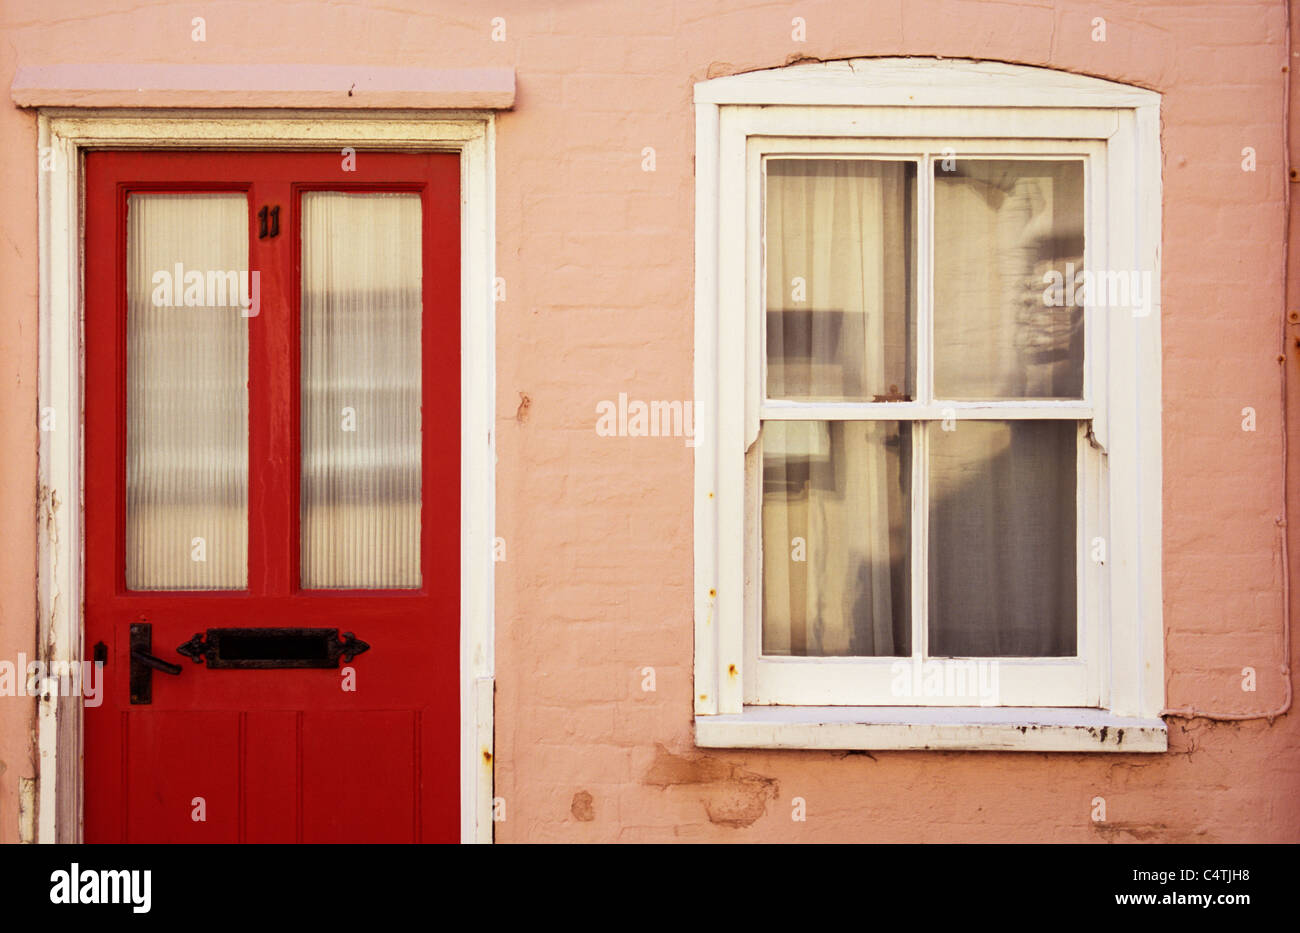 Detail of house with pink painted wall red front door and white sash window with net curtain bathed in warm reflected sunlight Stock Photo